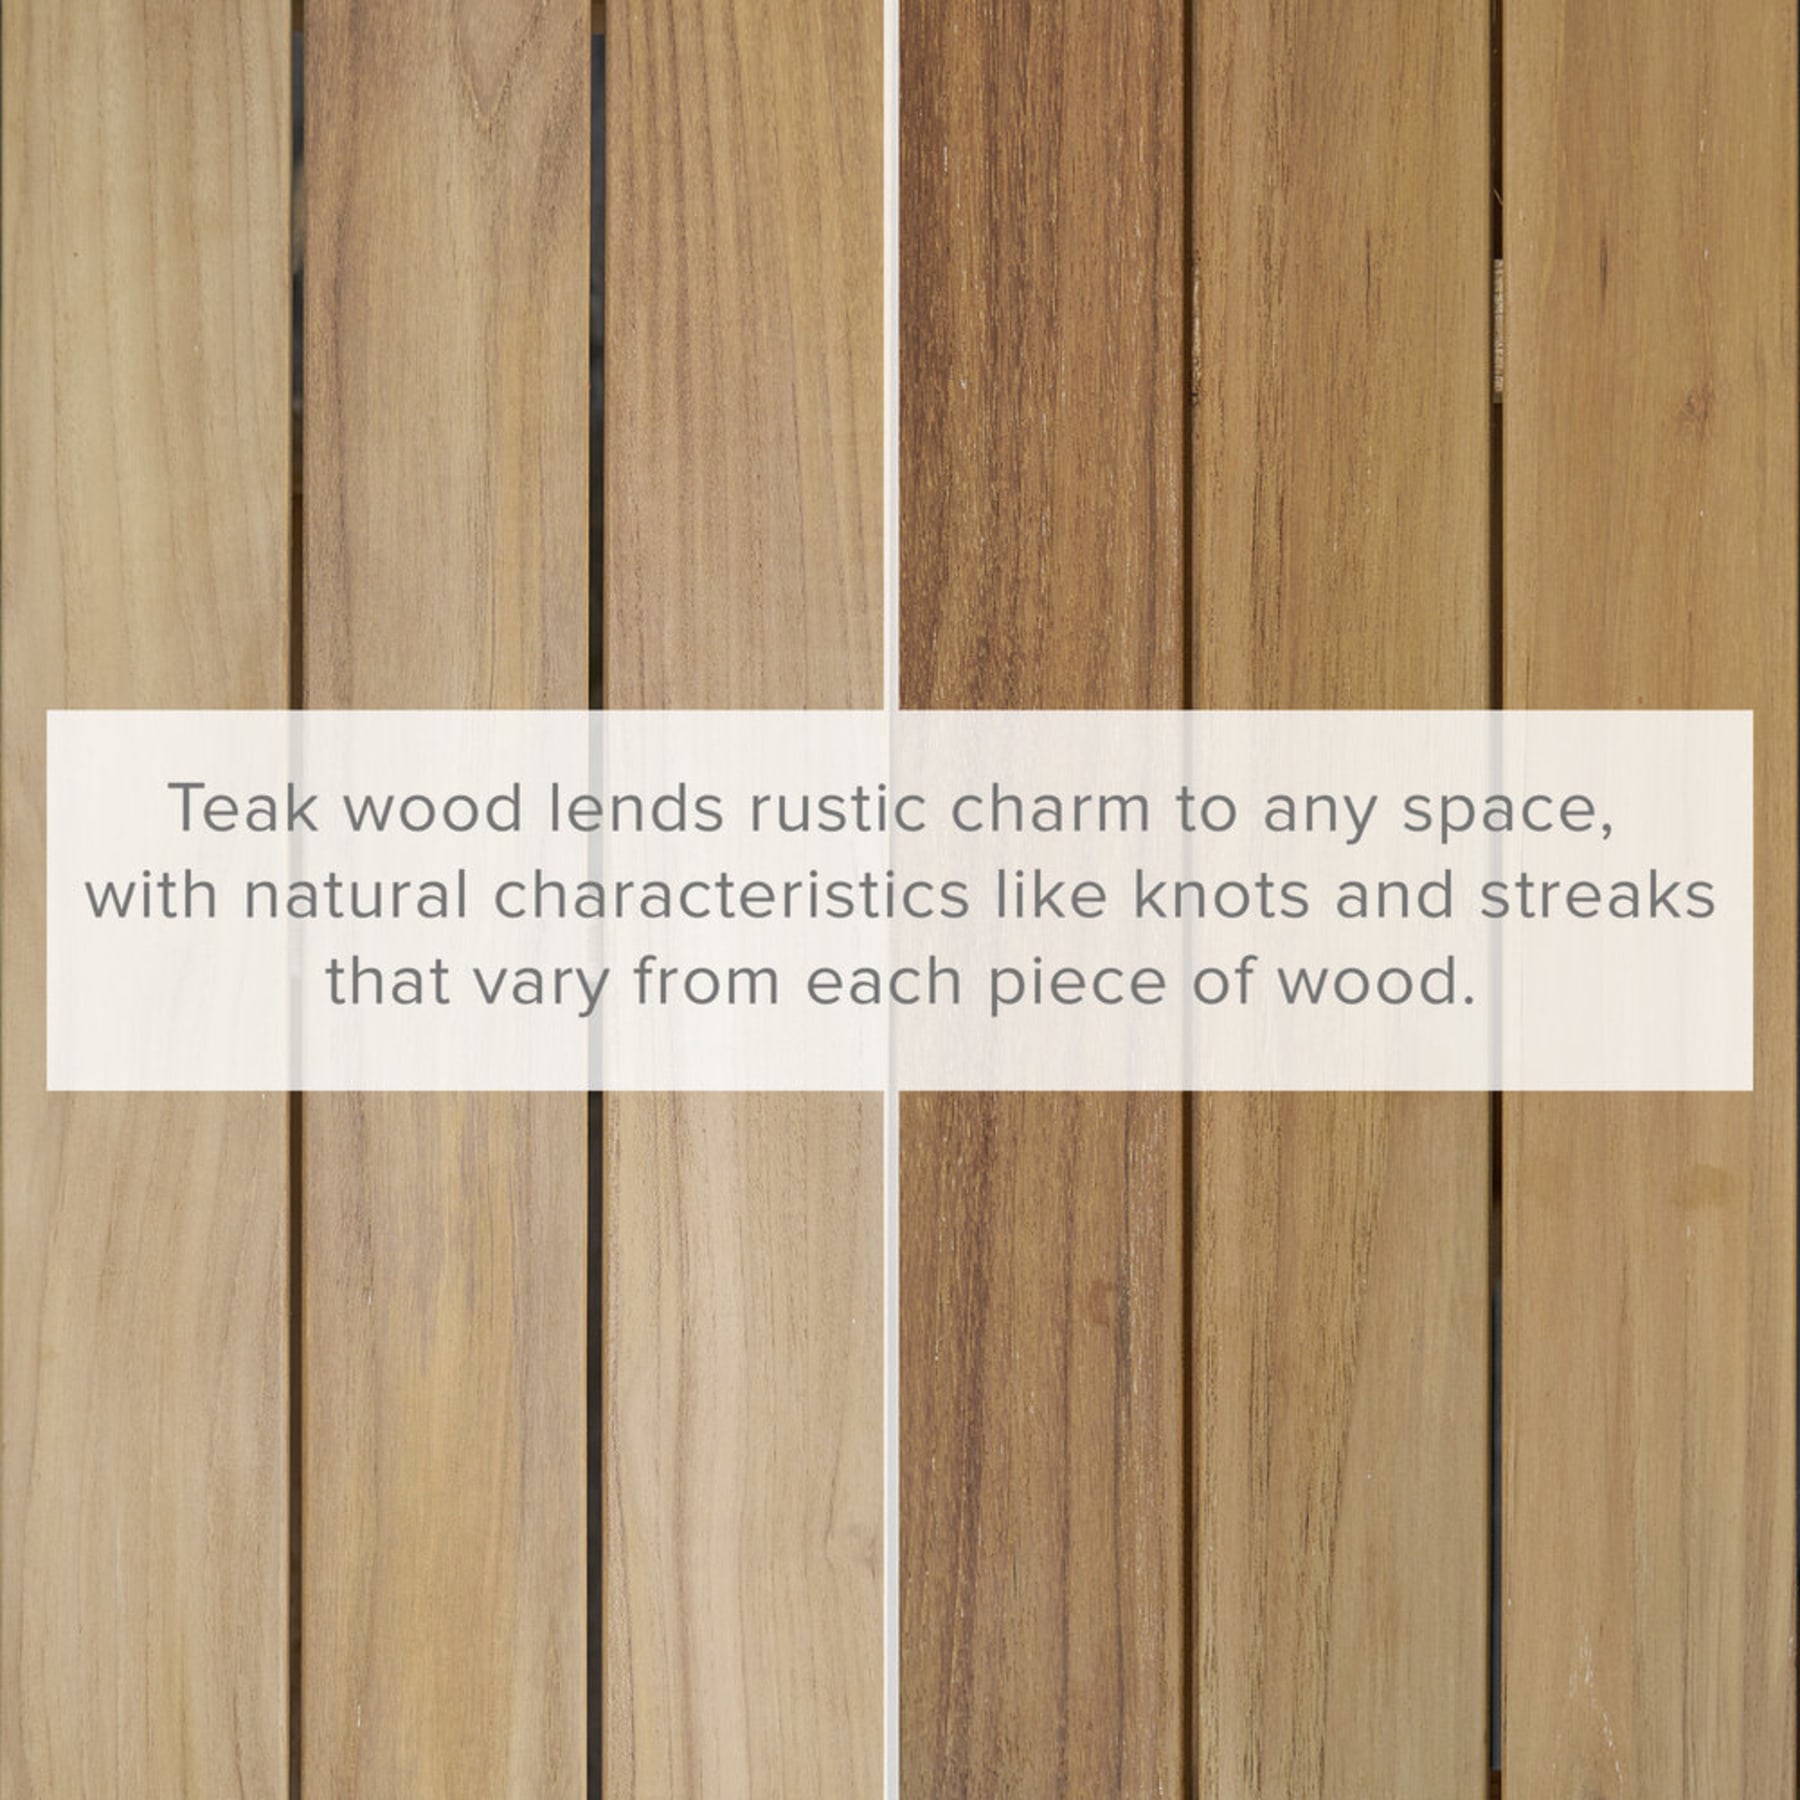 Close up of teak wood with an explanation that teak wood is a natural material with unique knots and streaks.